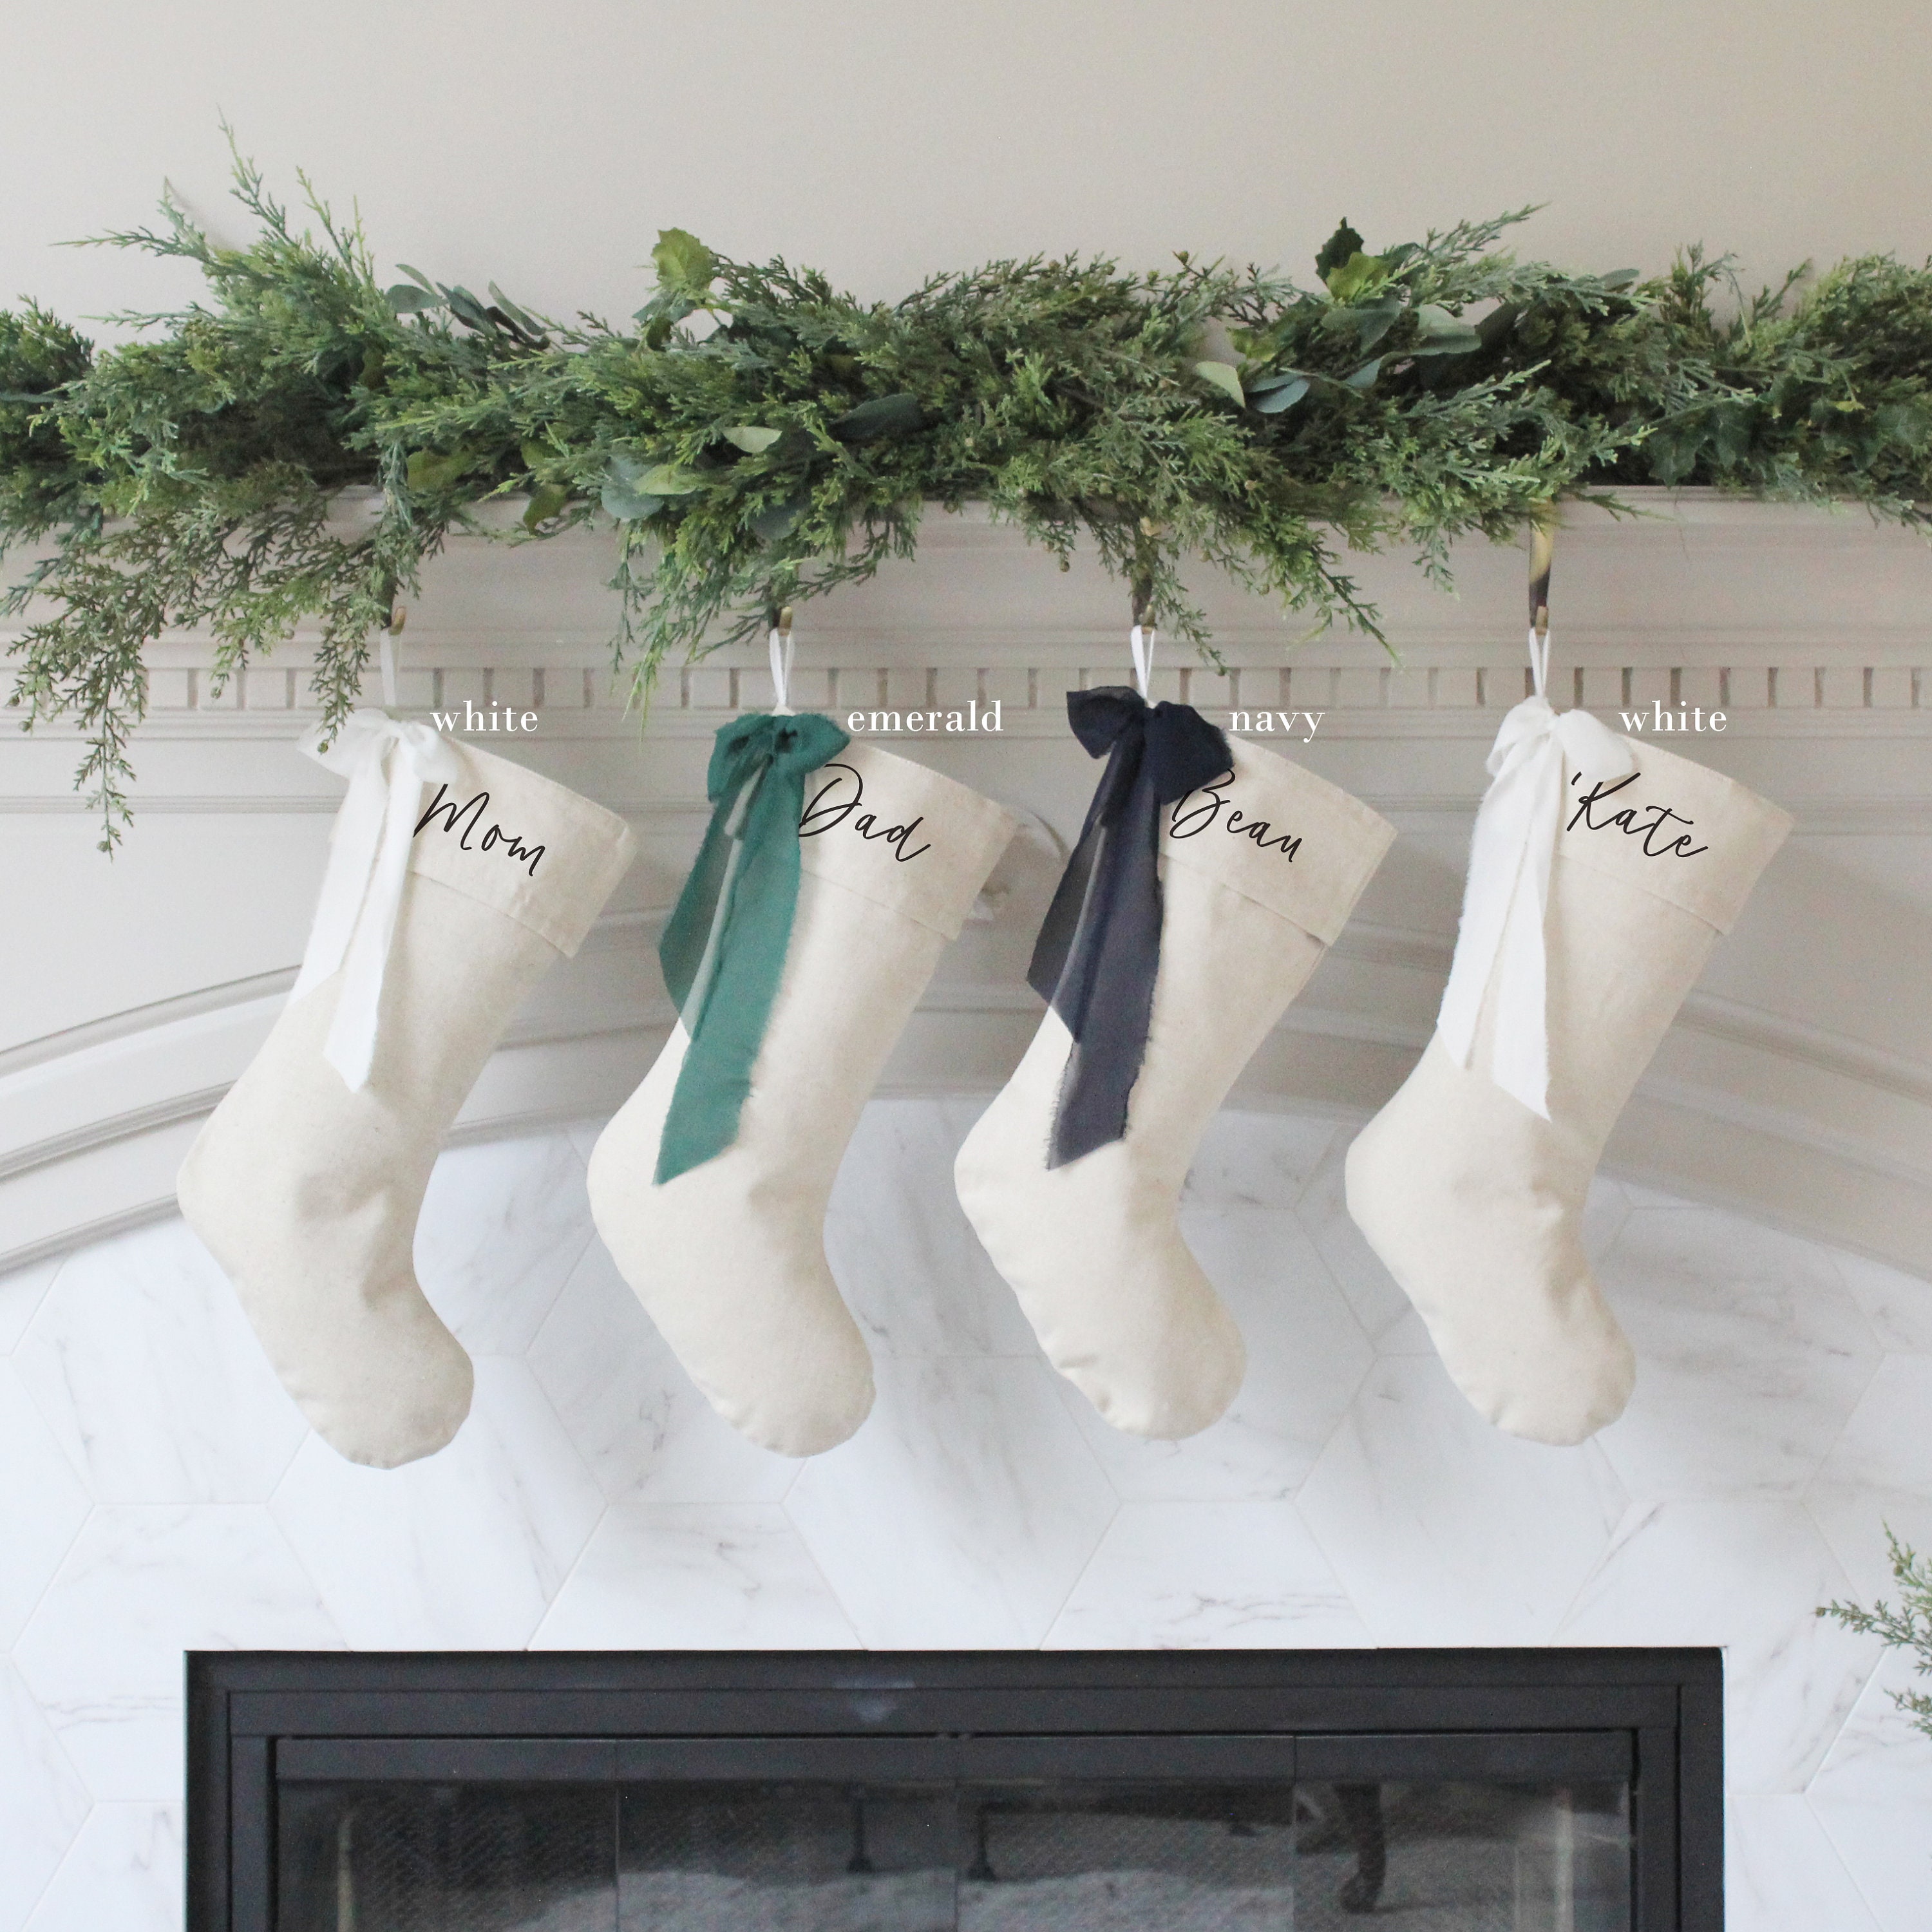 Kate Winter Christmas trees Fireplace Stockings Christmas Gifts for Pictures